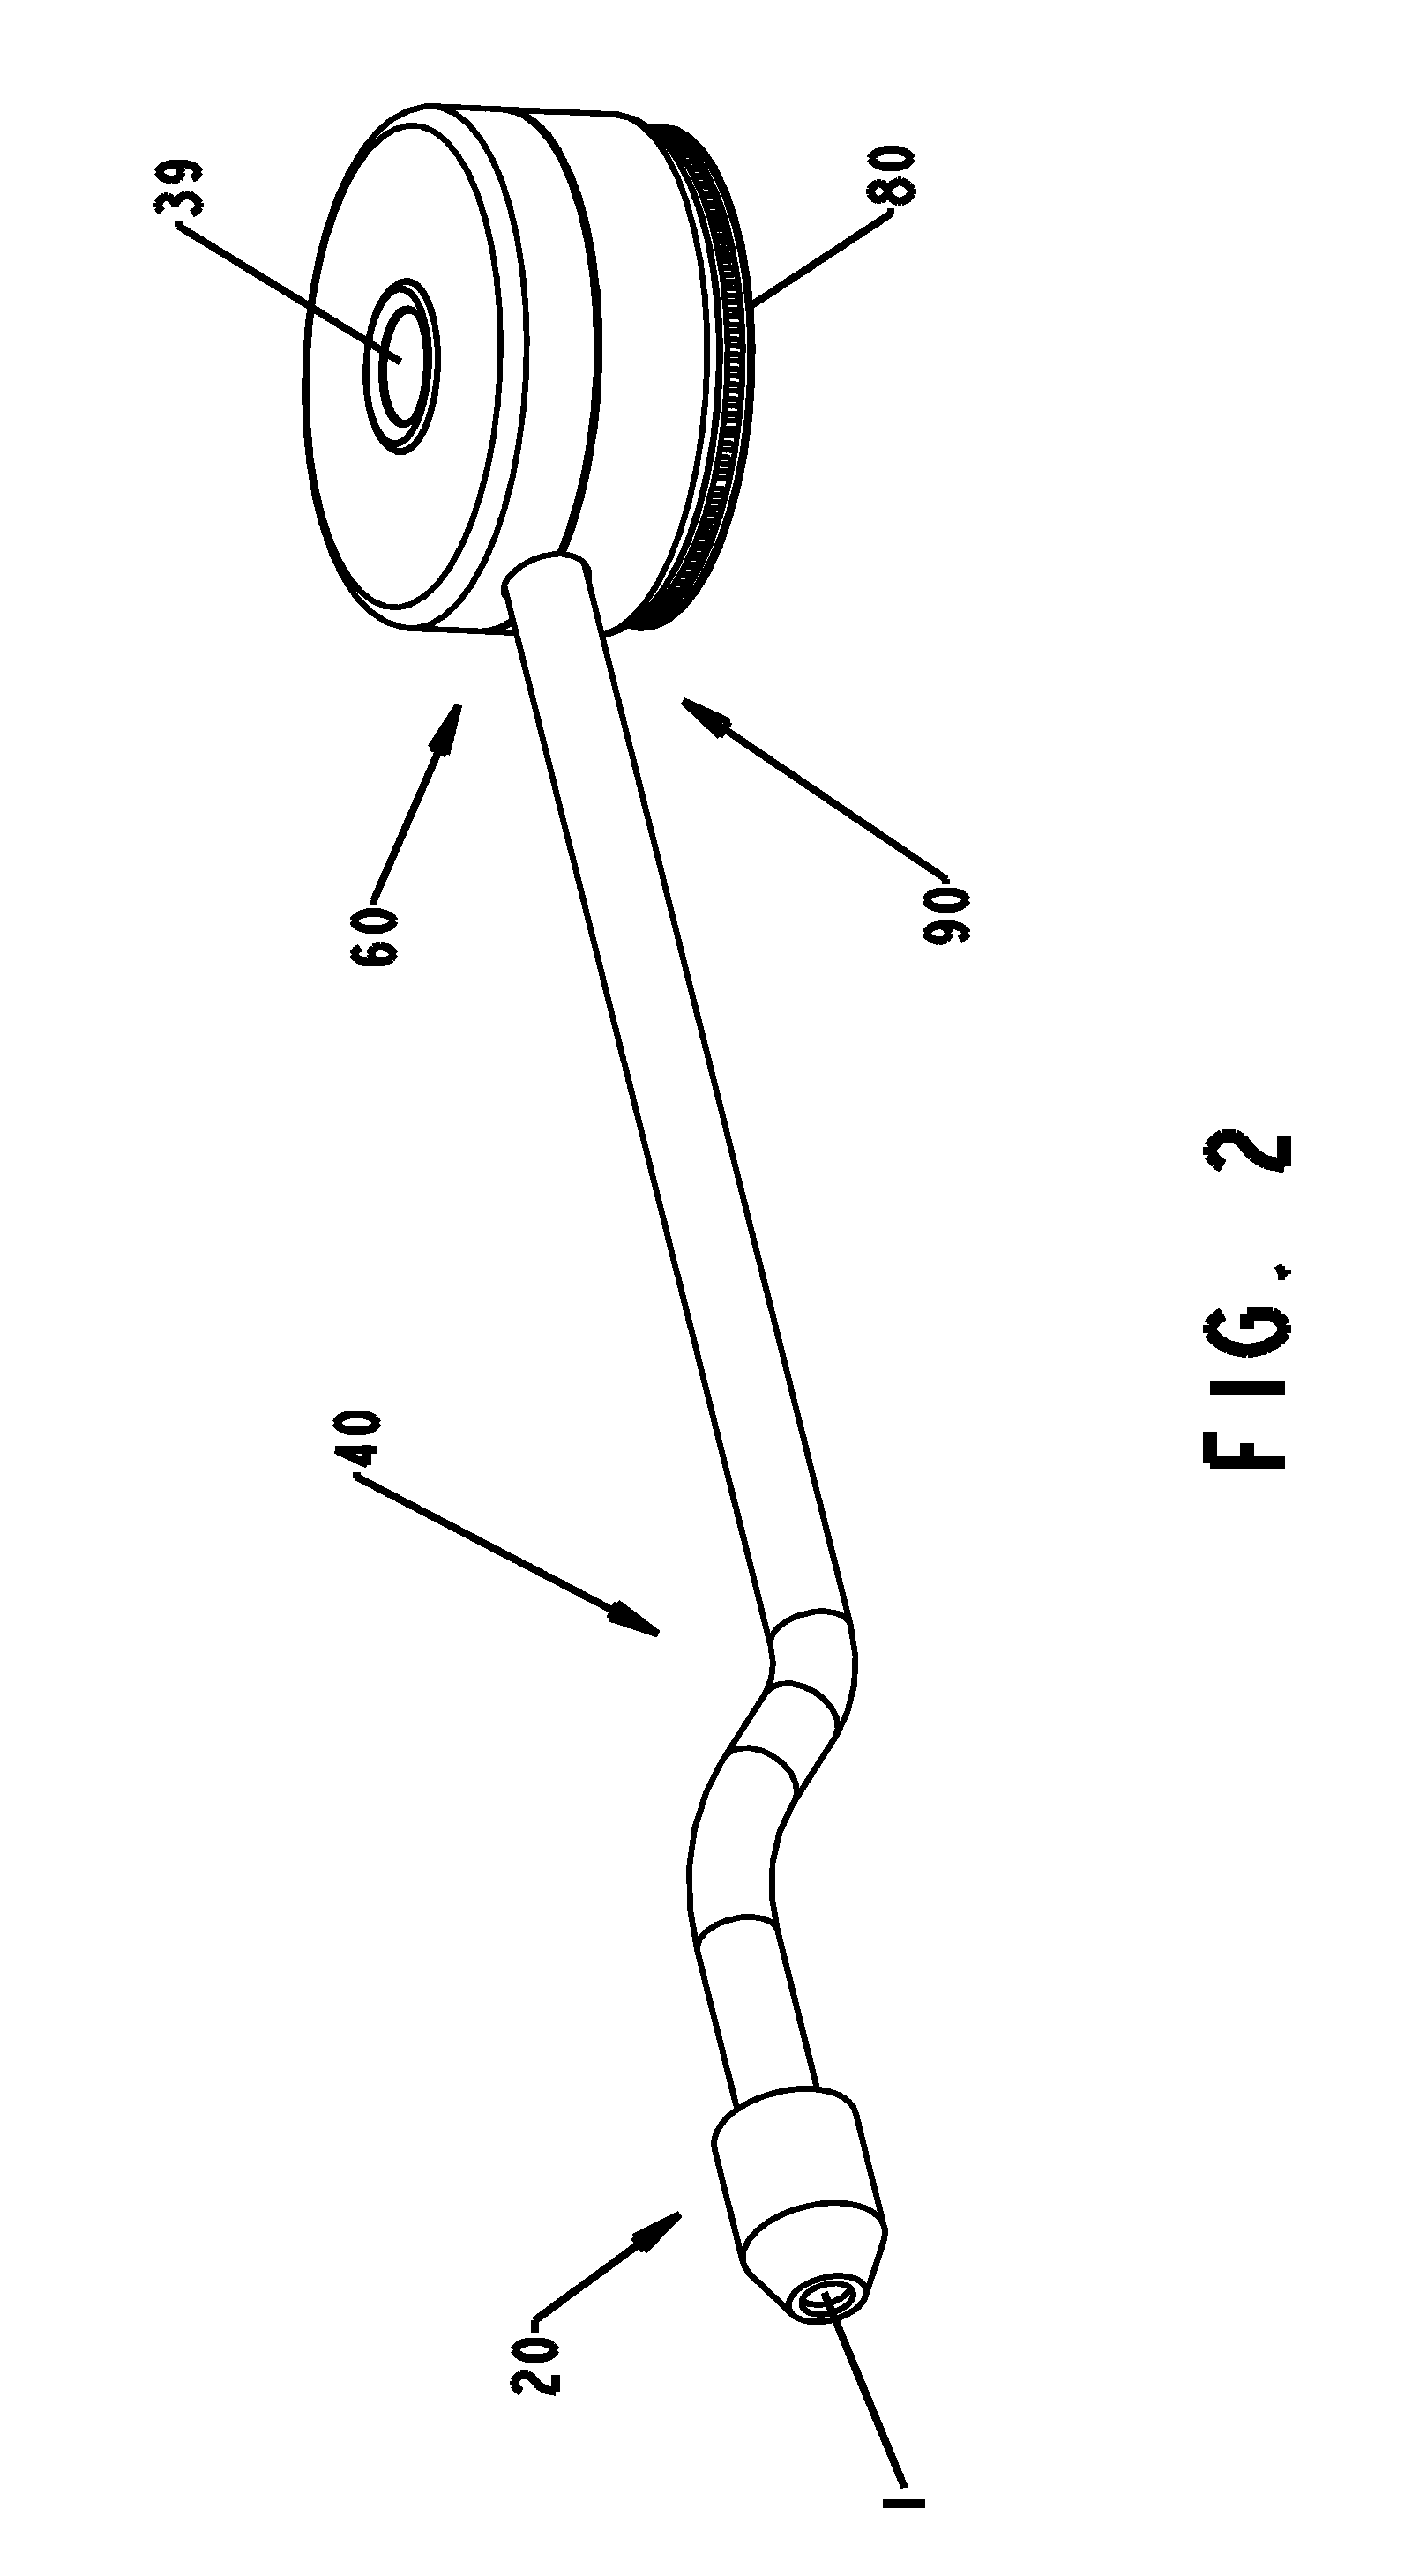 Medical Illumination Device with Sterile Packaging